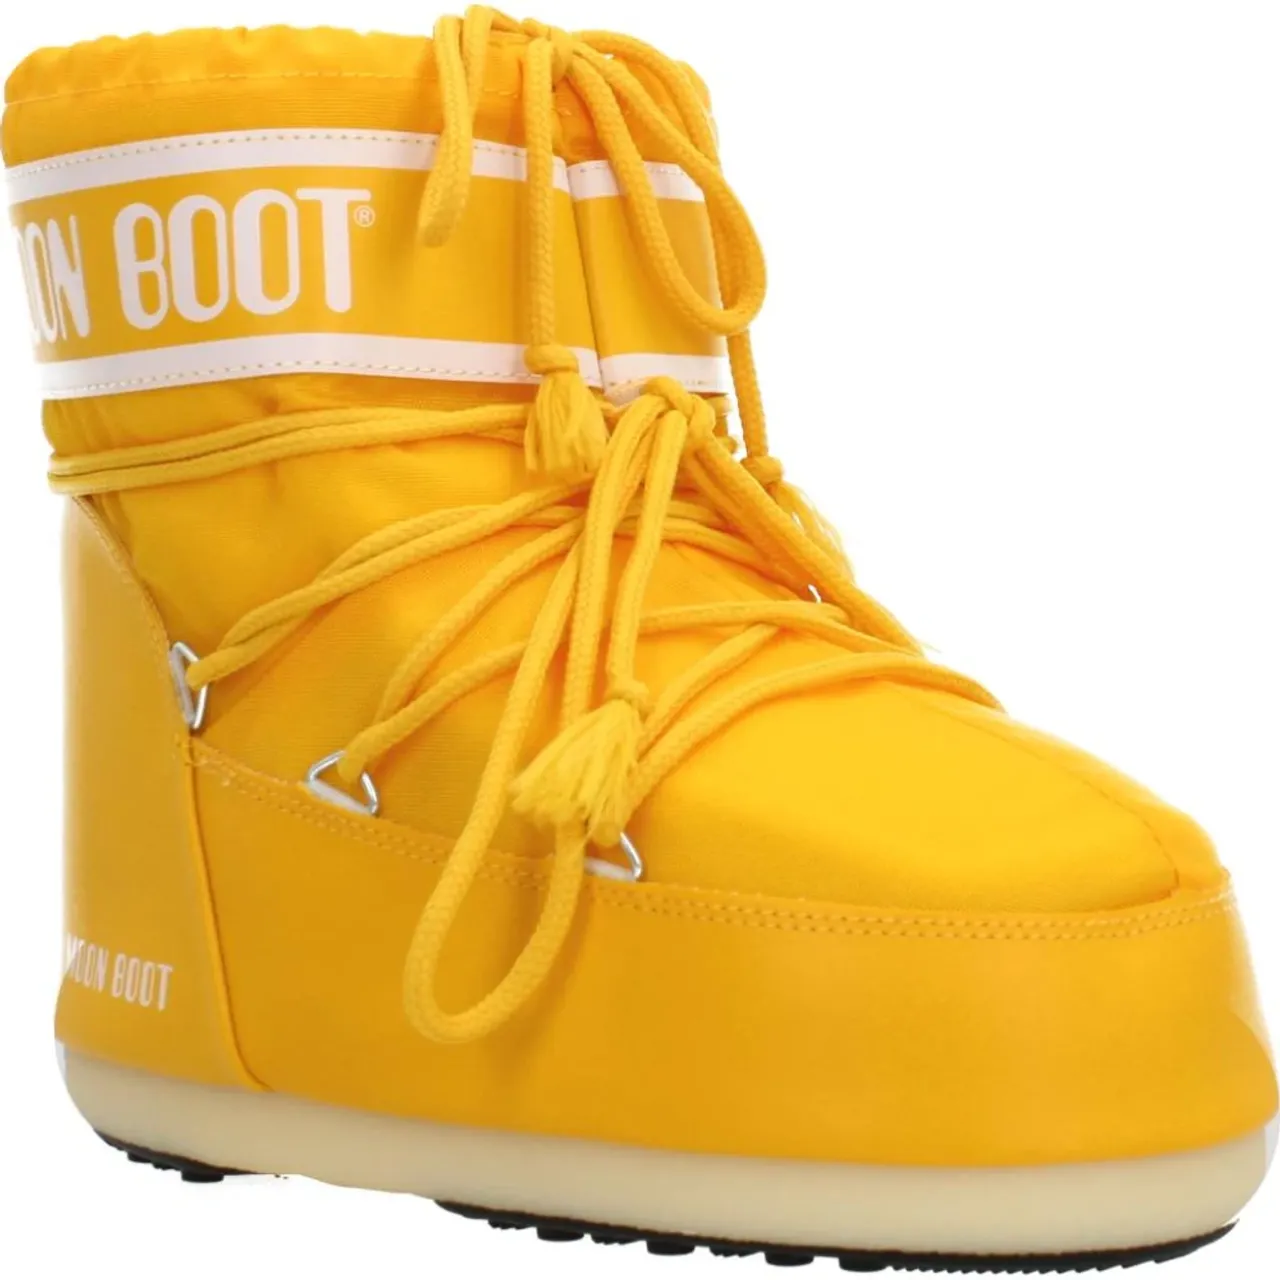 Winter Boots Moon Boot